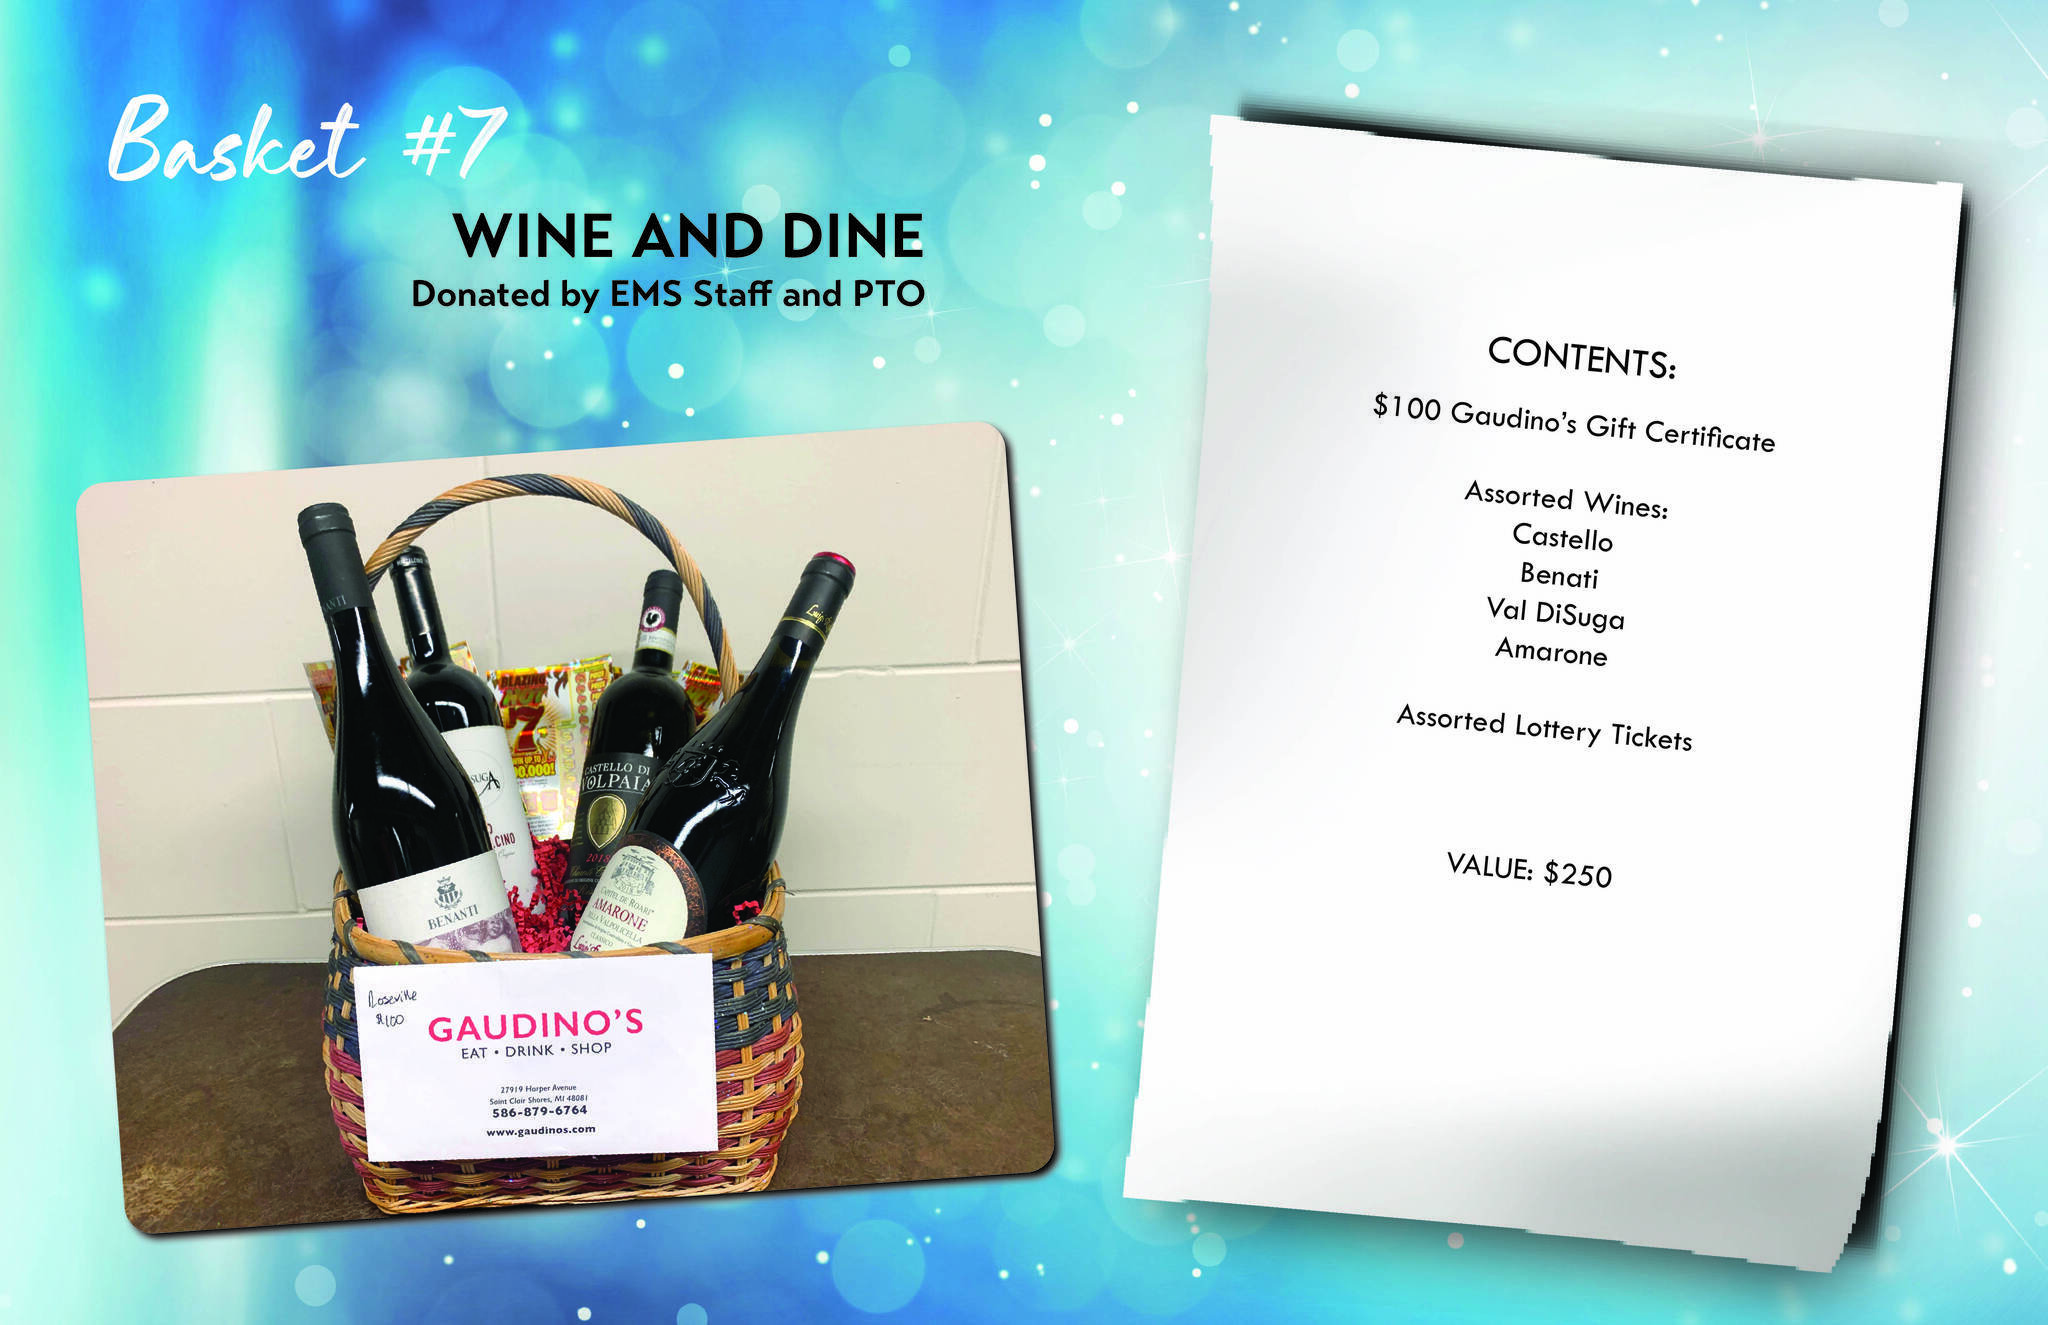 Donated by the EMS Staff and PTO: Features $100 Gaudino's gift certificate, assorted lottery tickets, and several bottles of wine.